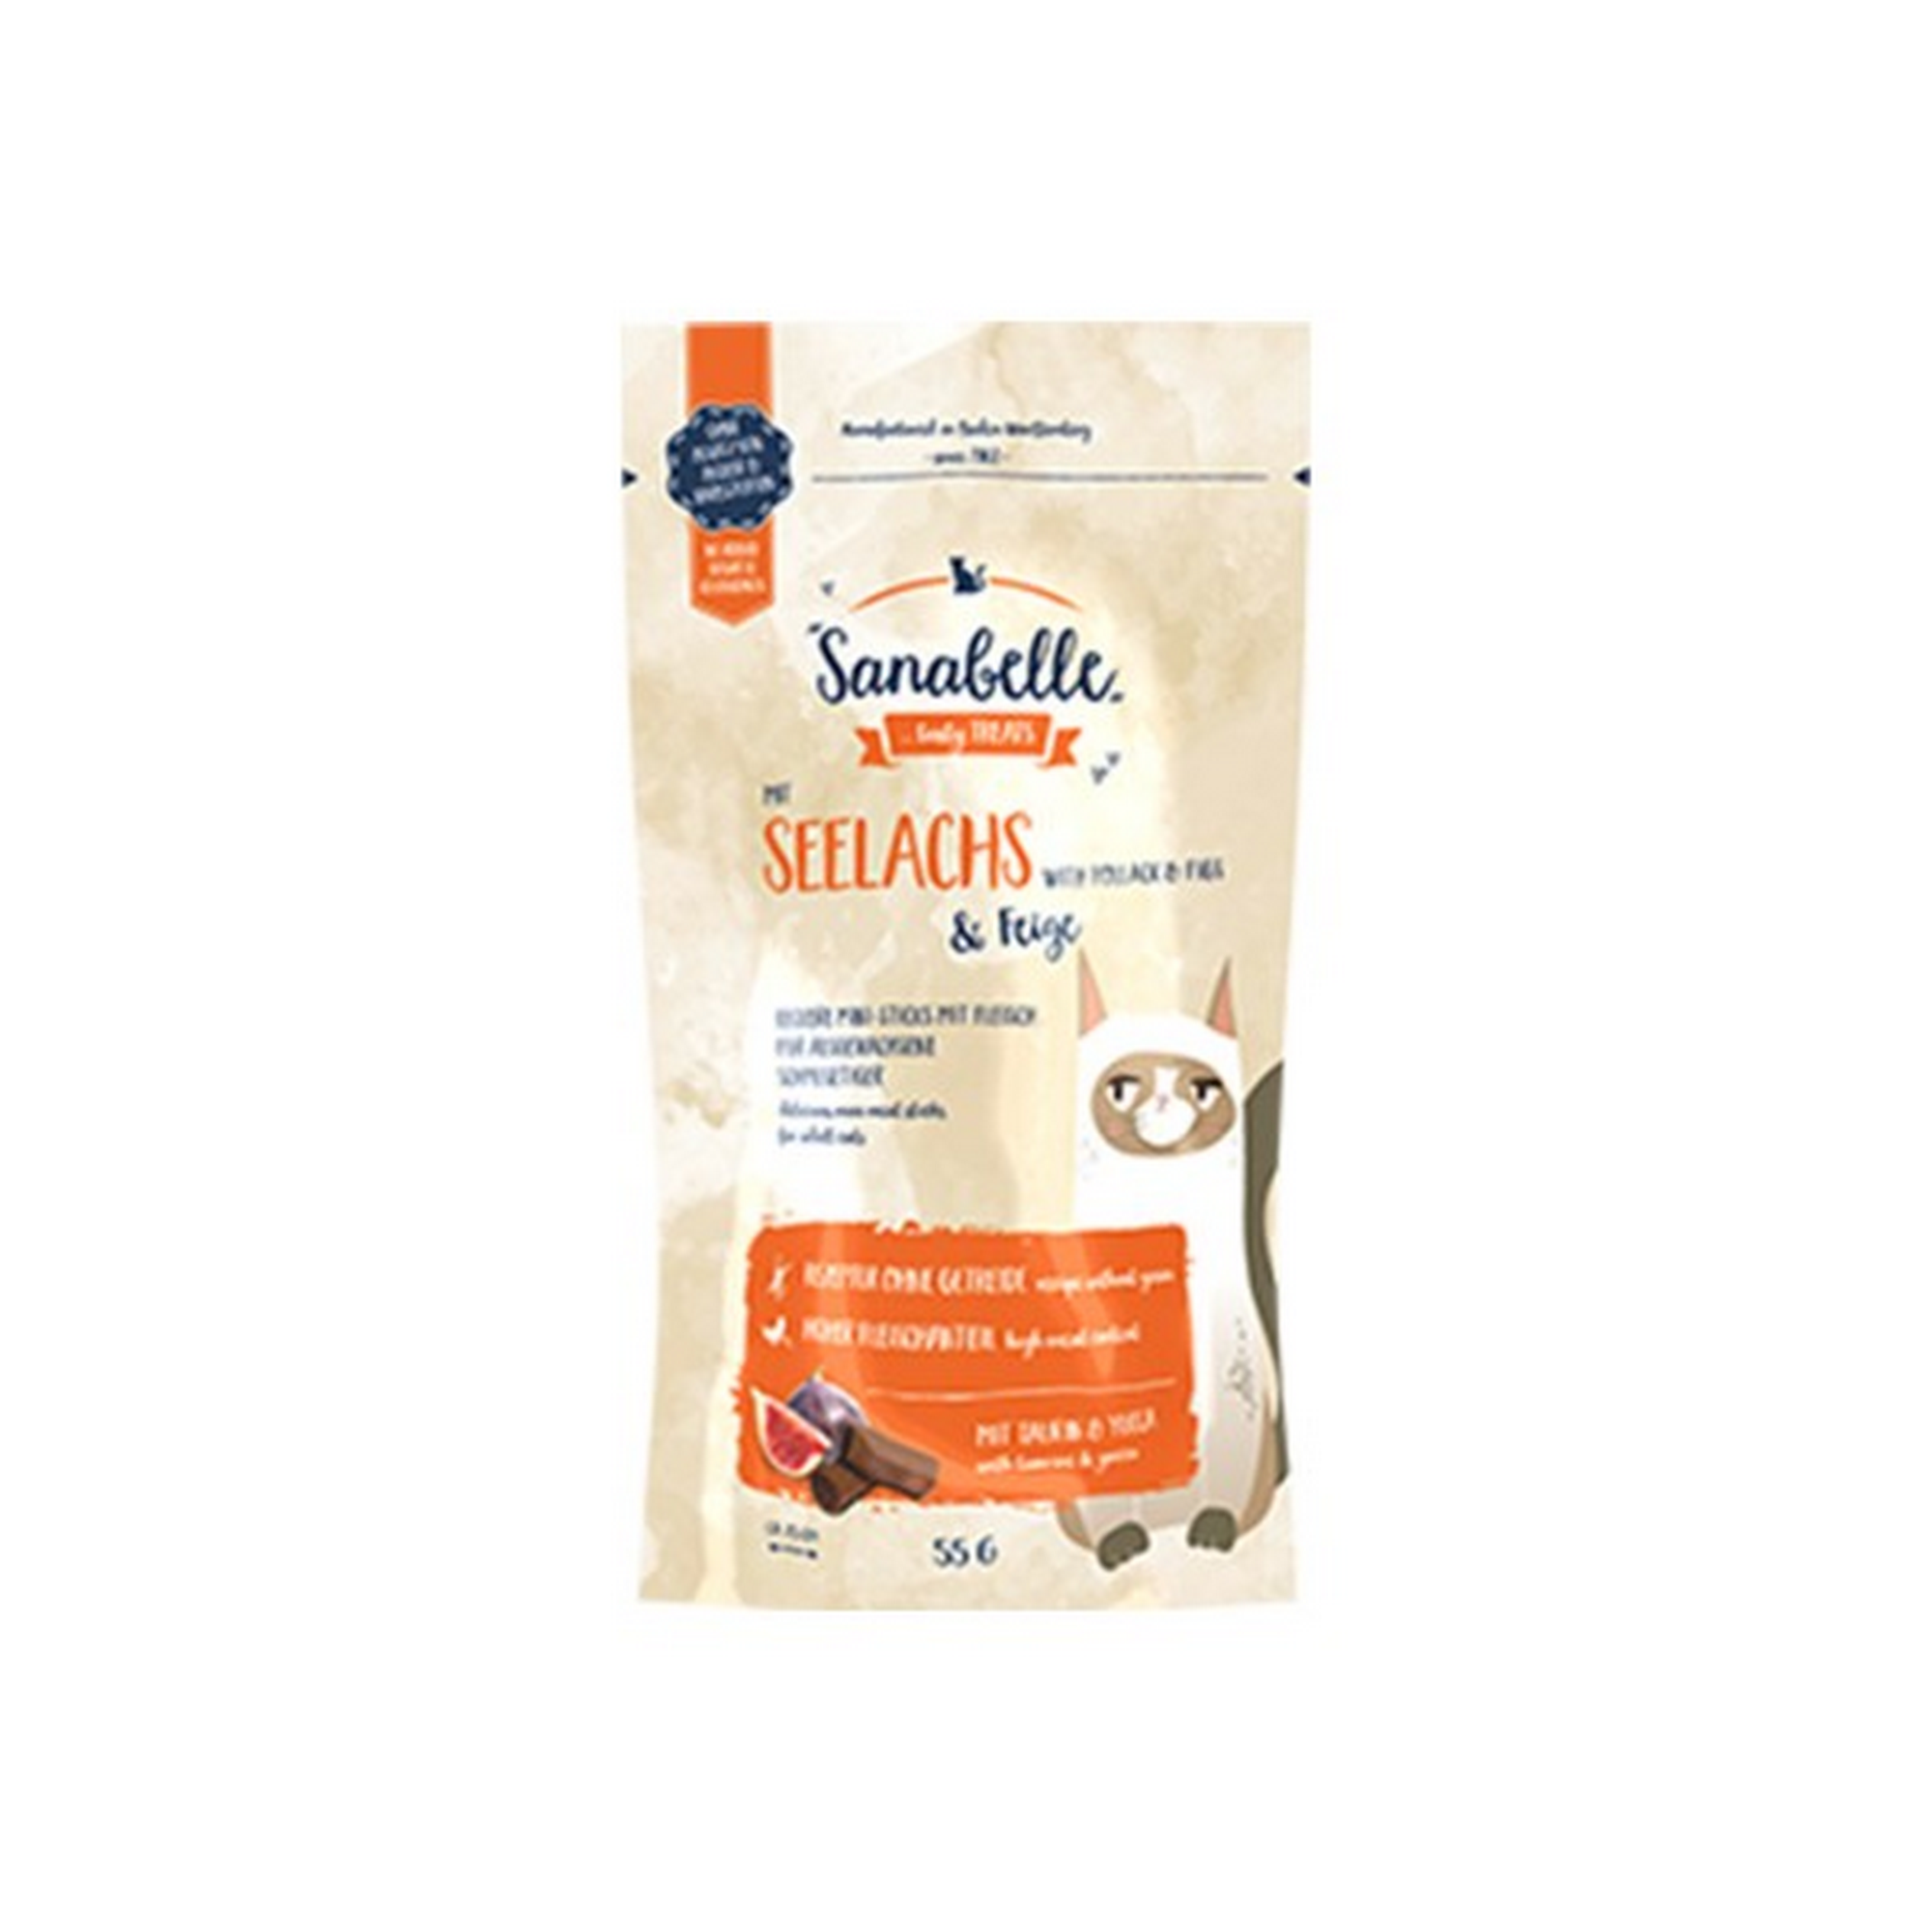 Katzensnack Seelachs & Feige 55 g + product picture